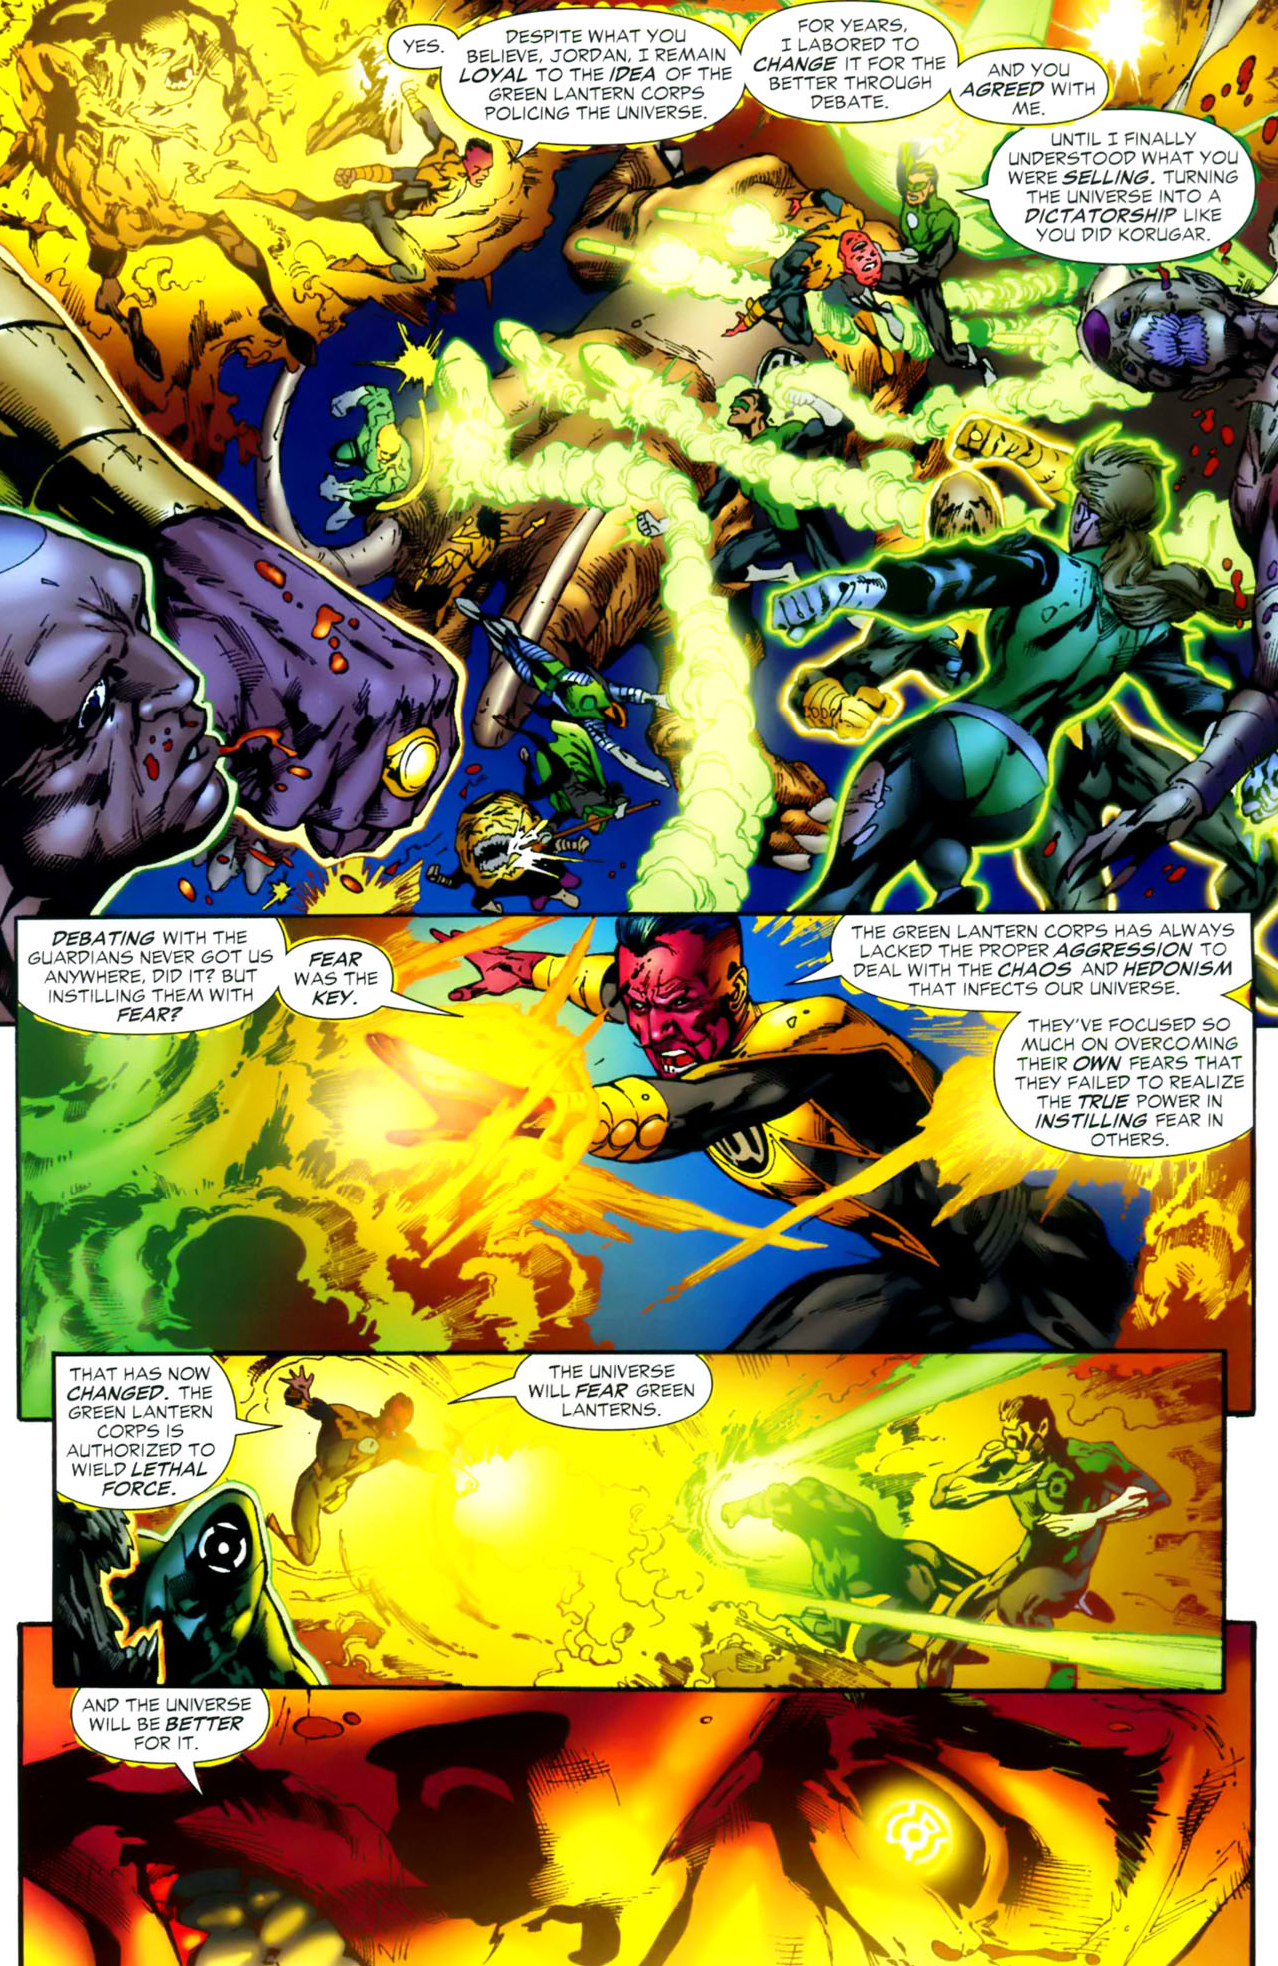 sinestro's real wish for the green lantern corps 